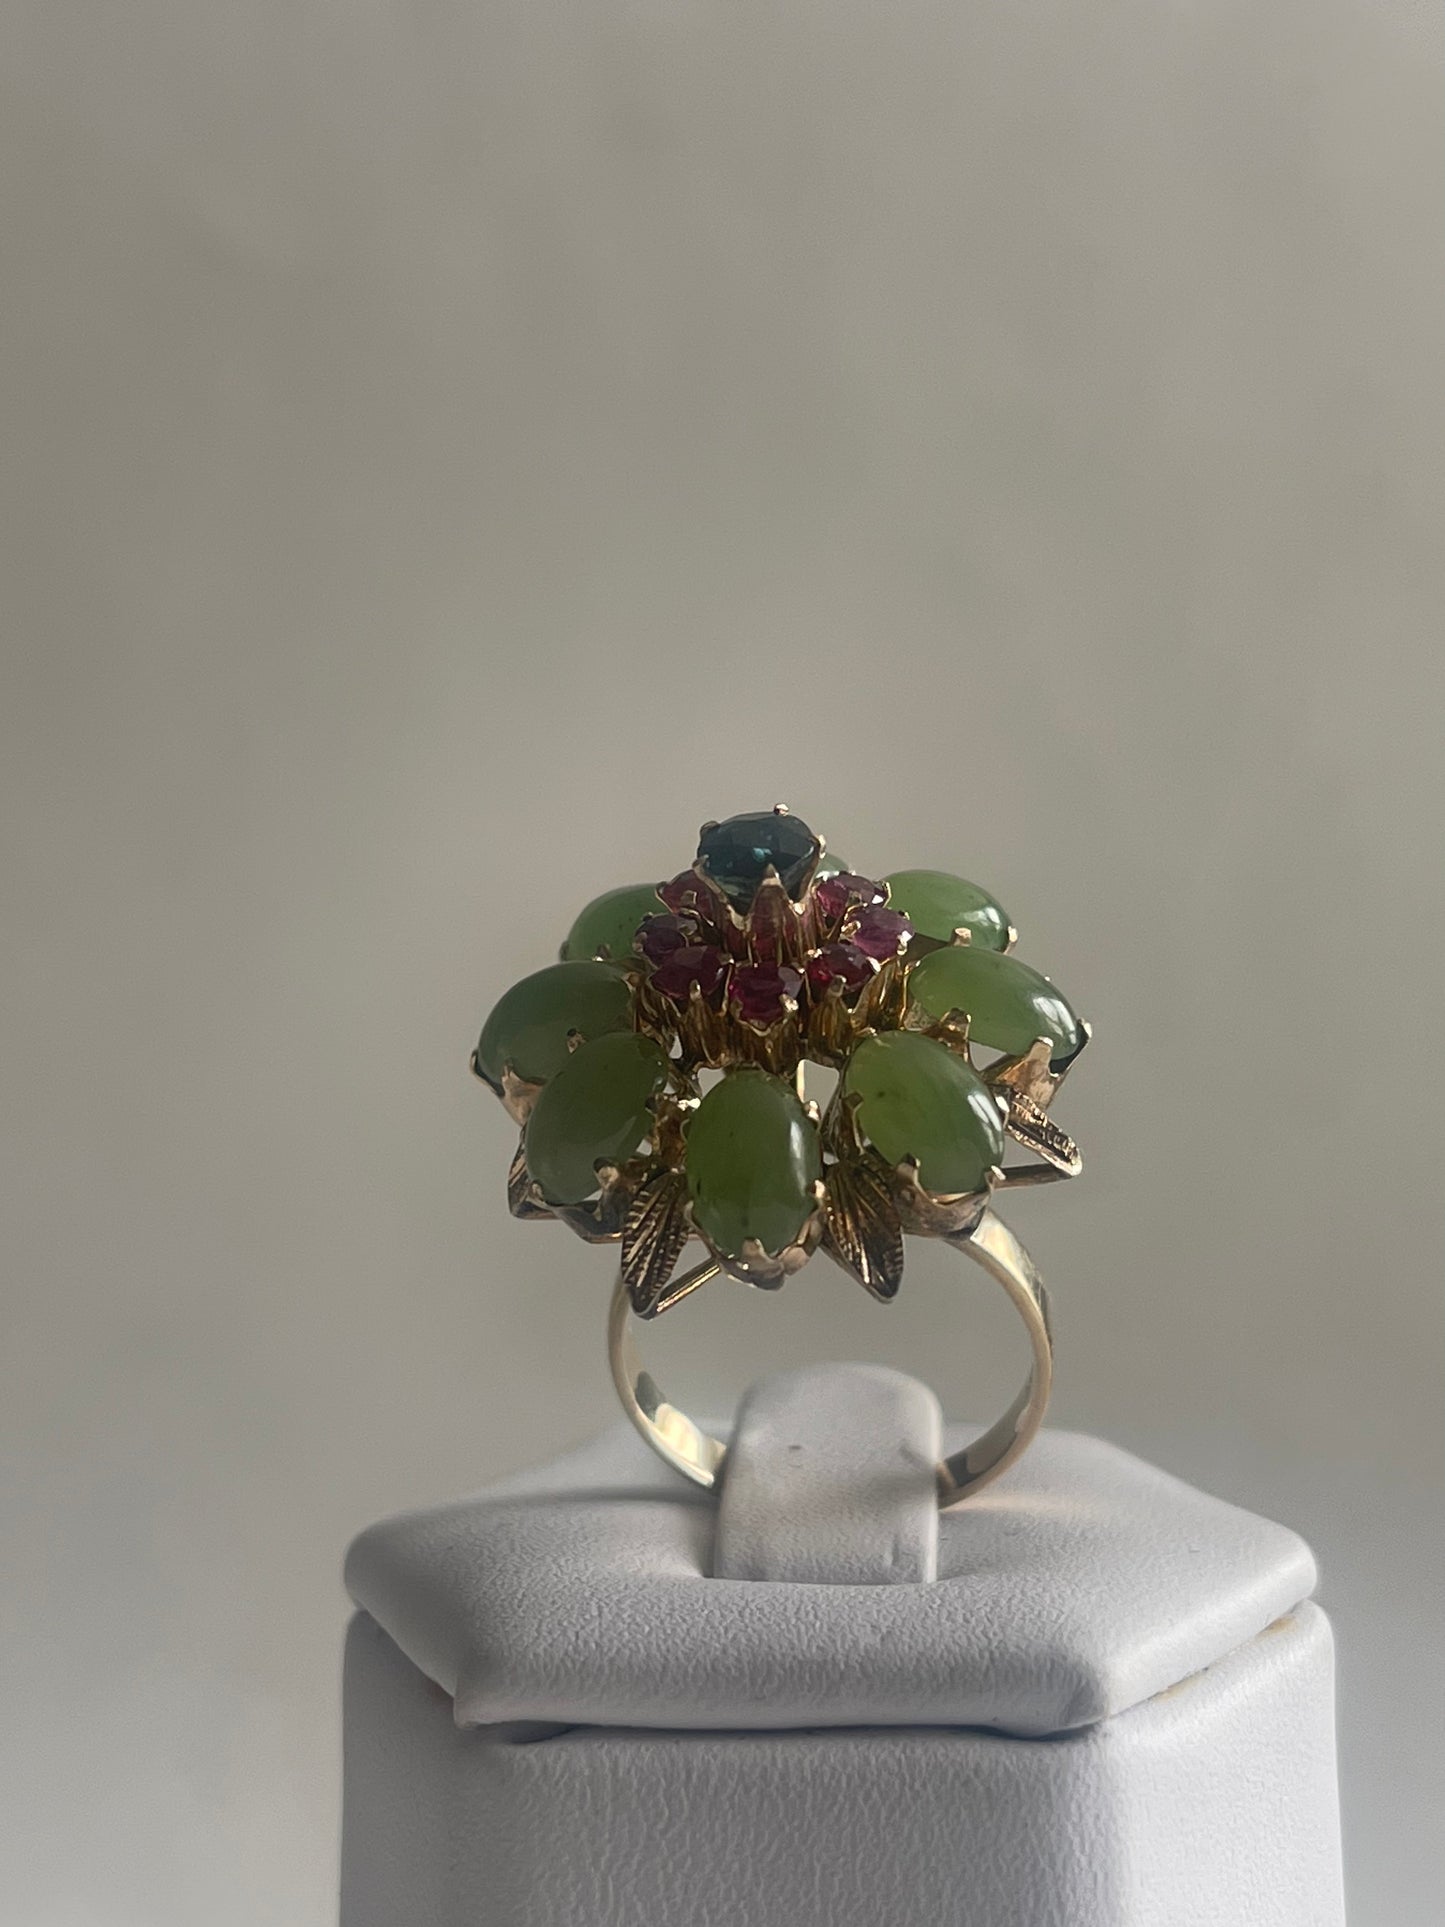 A vintage jade, ruby and sapphire cocktail ring